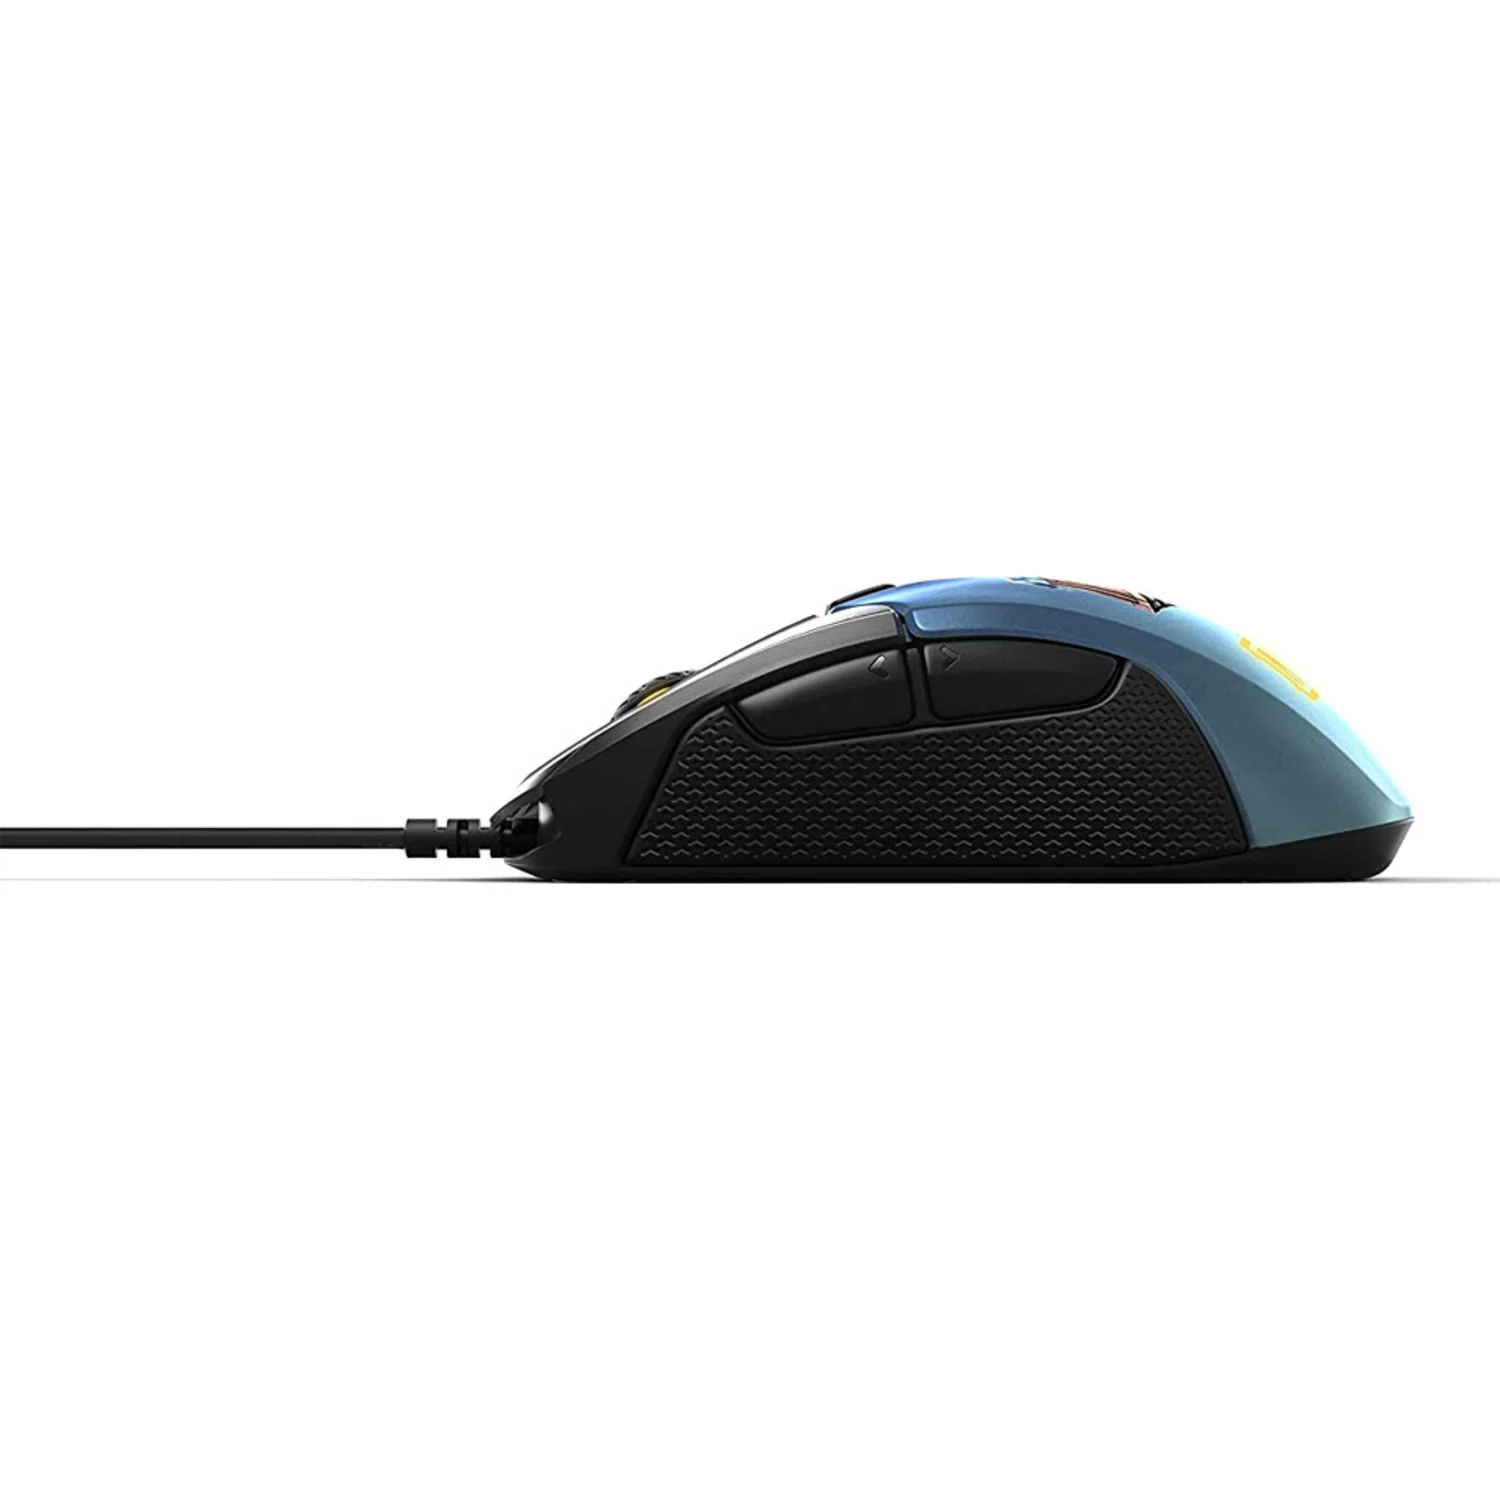 Mouse Gamer Steelseries Rival 310 PUBG Edition - (62435)